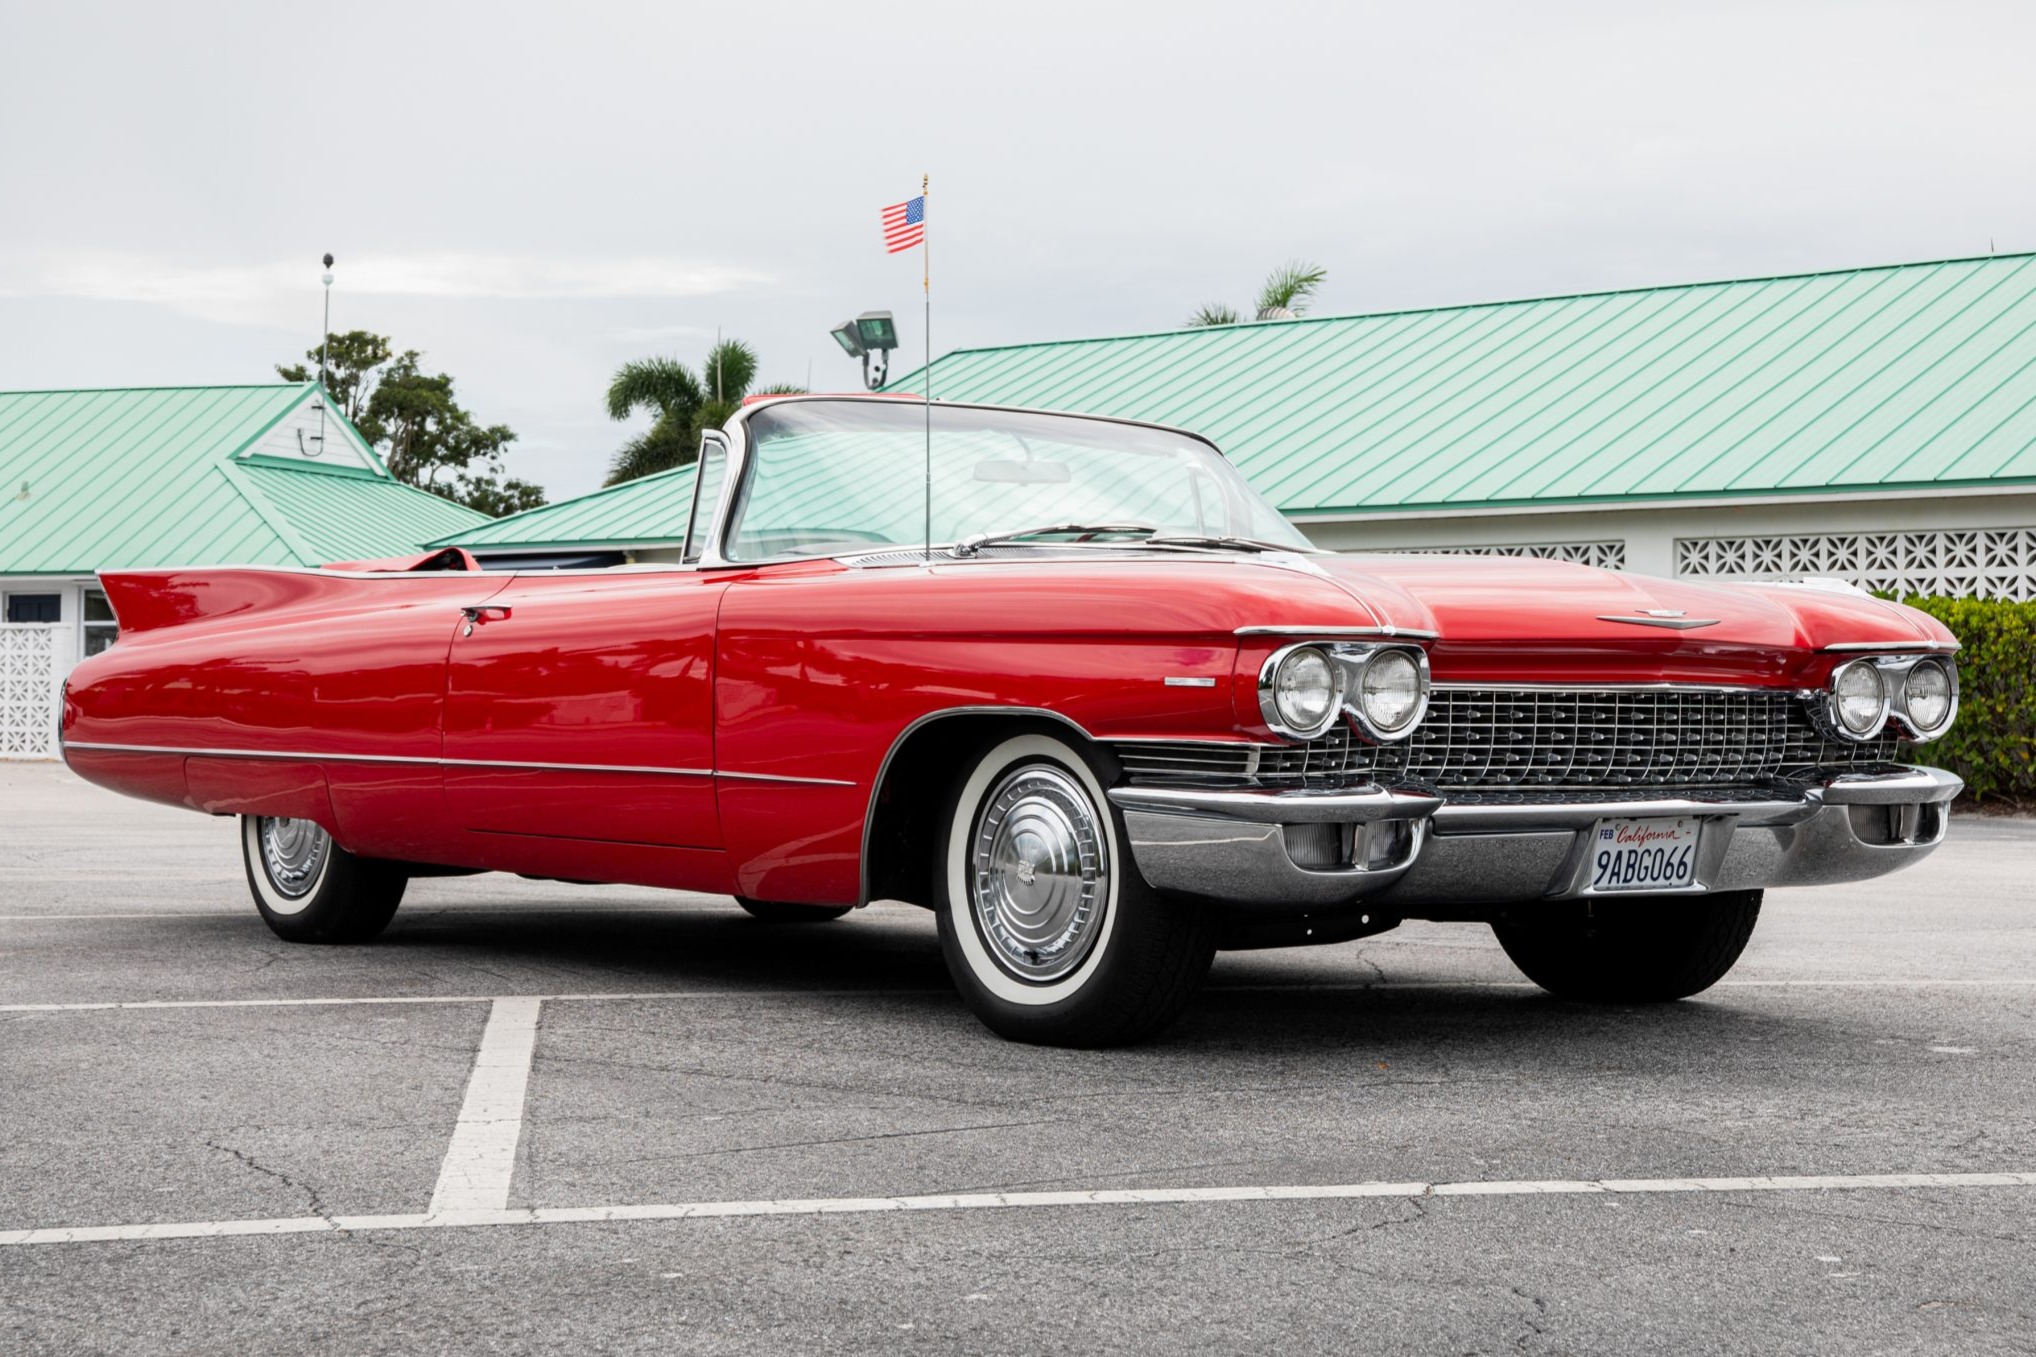 Used 1960 Cadillac Series 62 Convertible Review